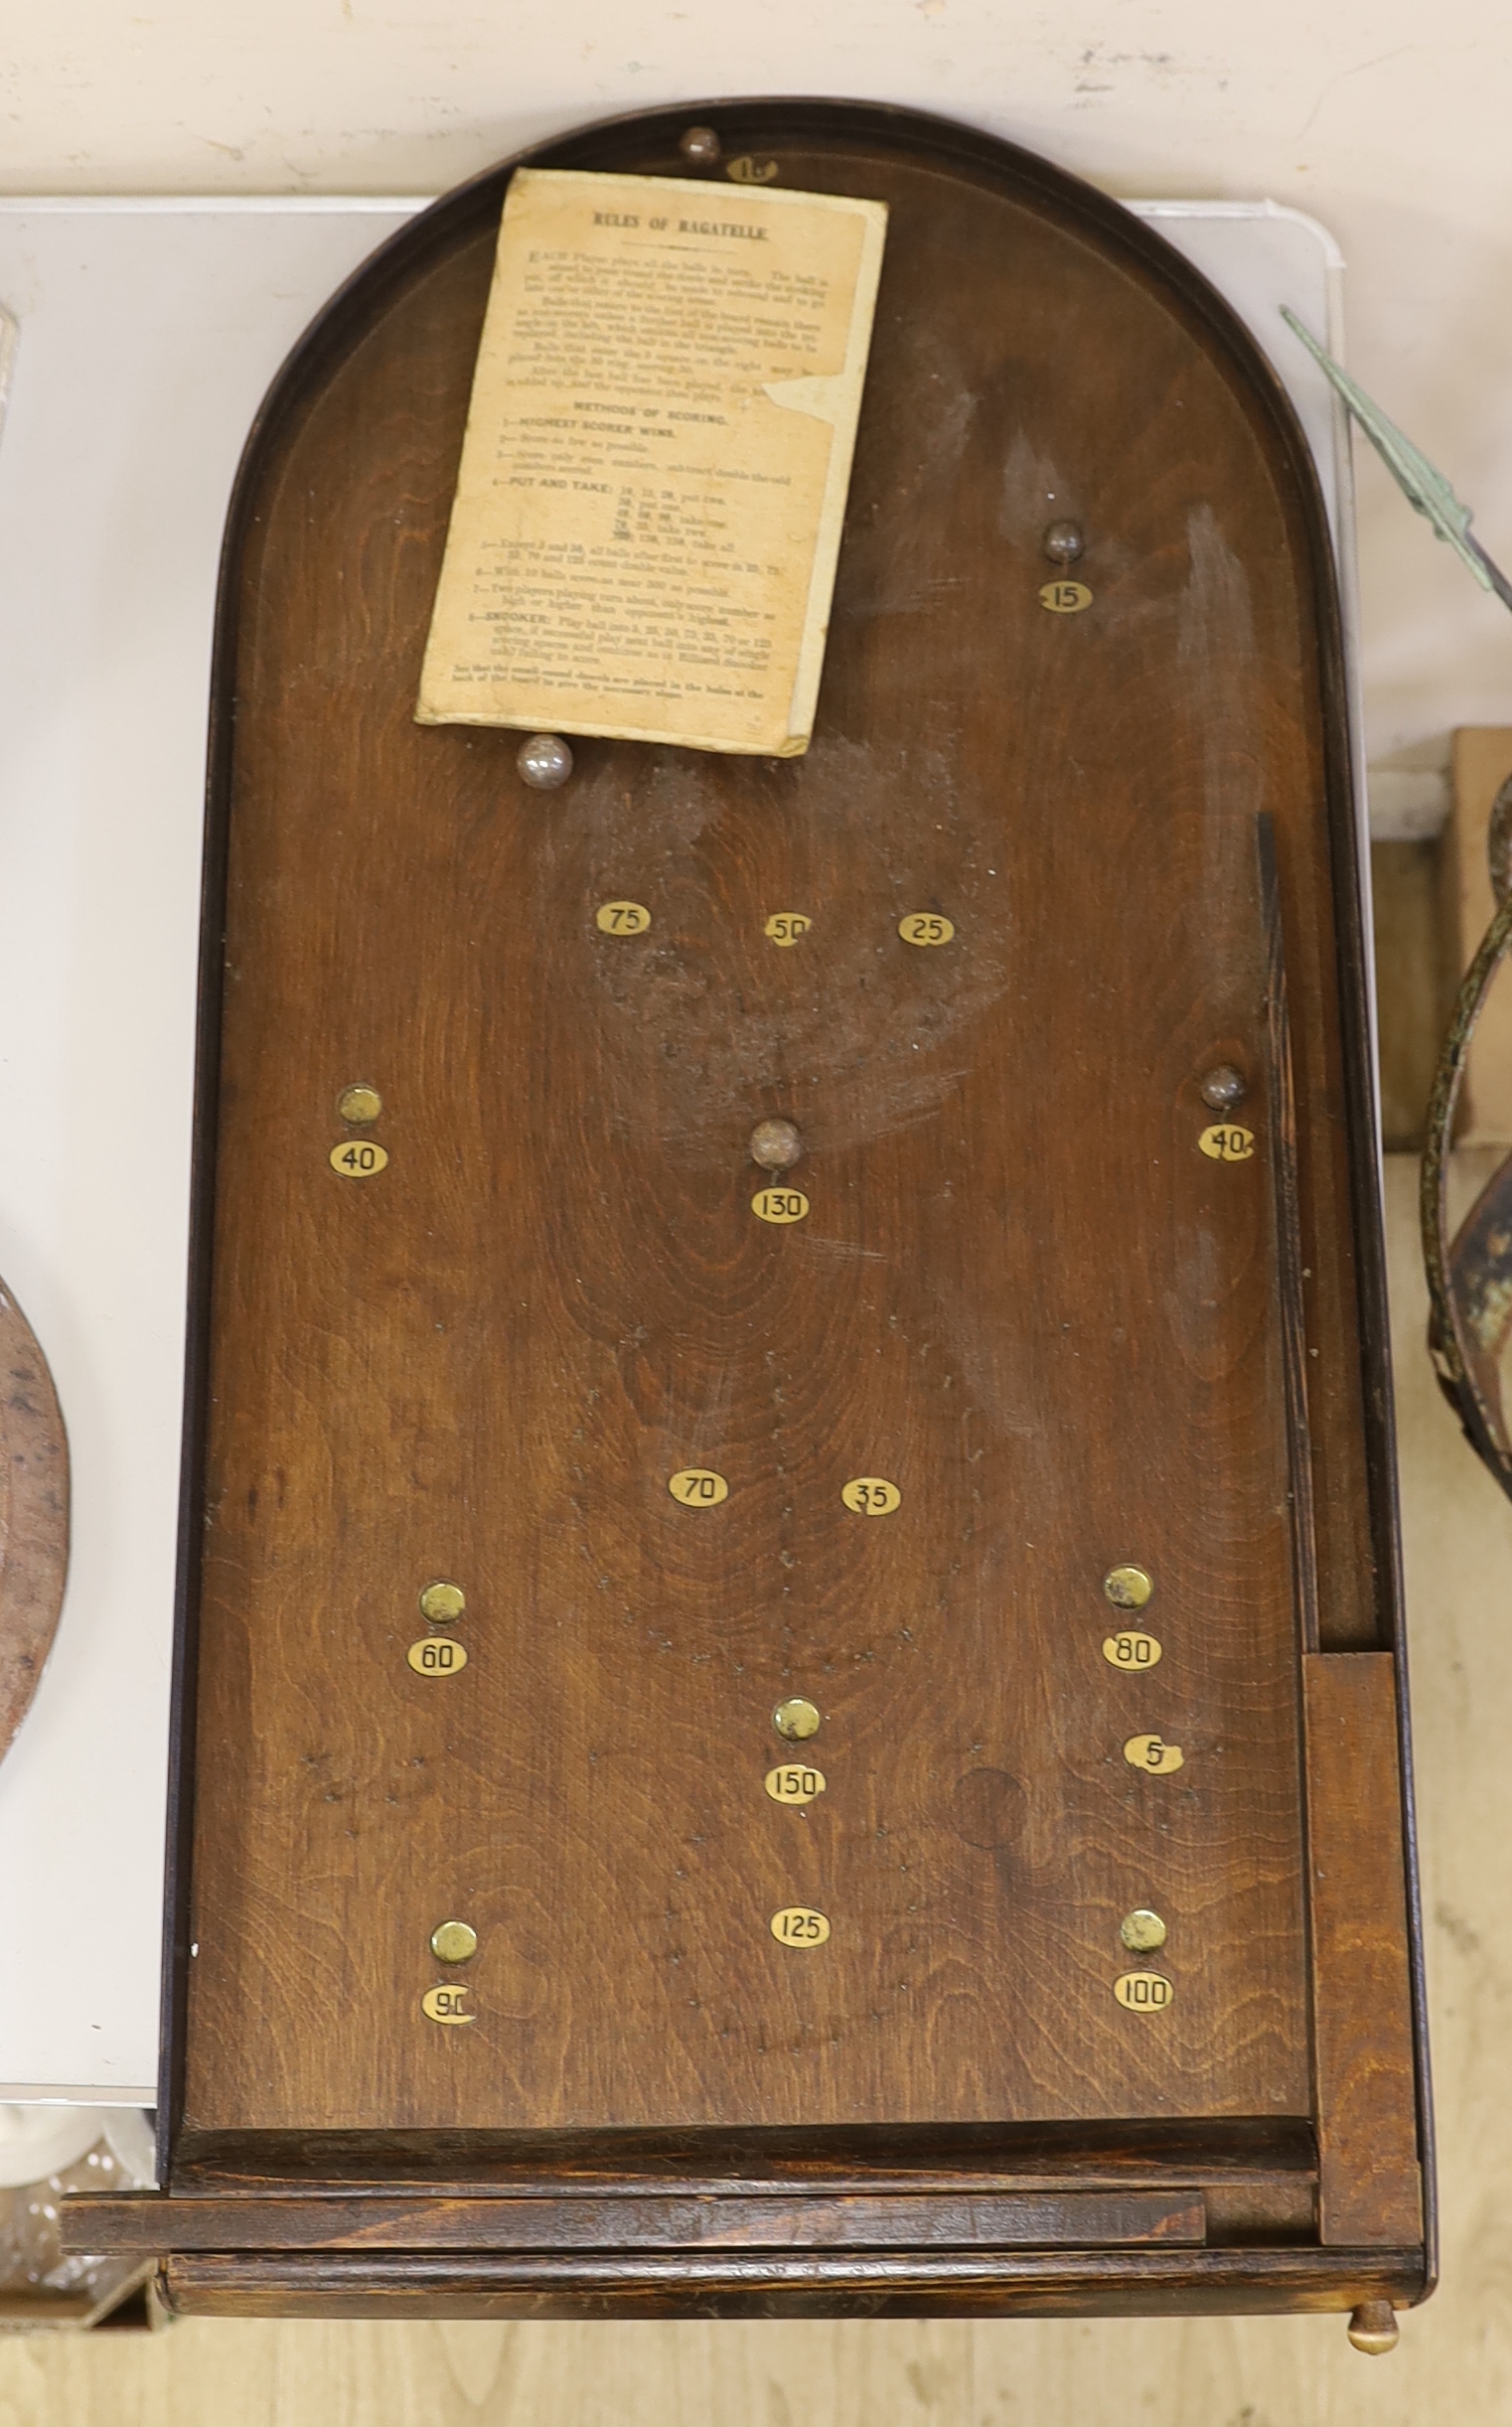 A bagatelle board with balls and instructions